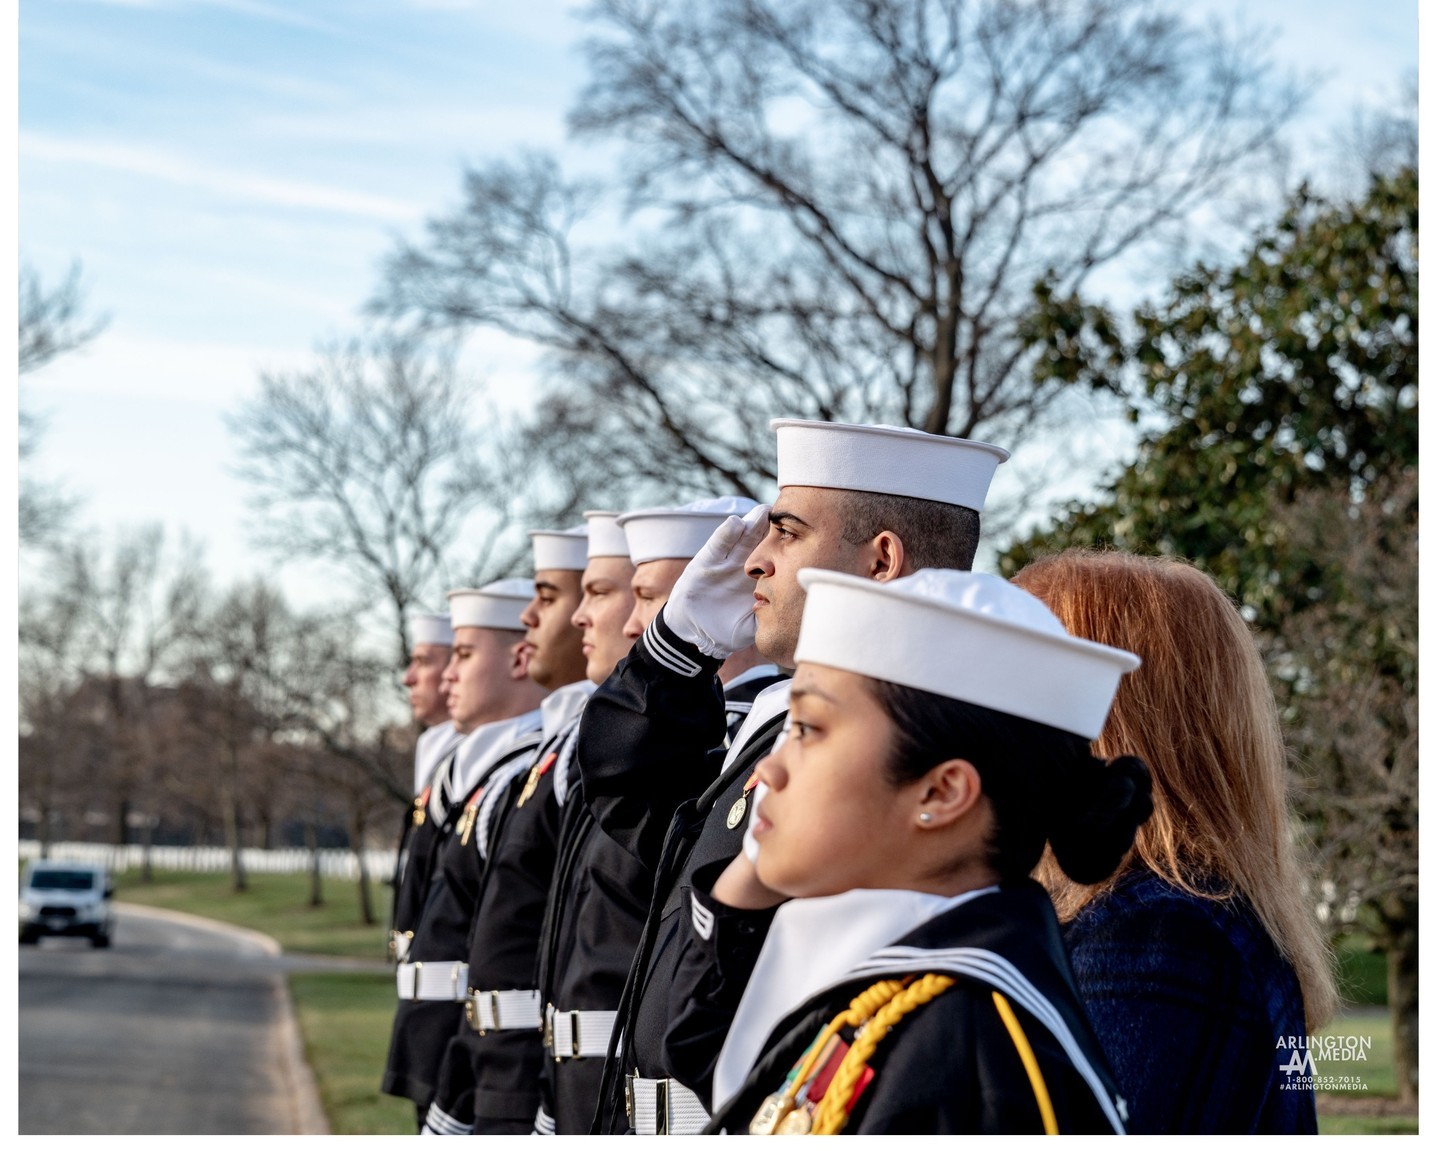 Sailors salute a funeral procession as they approach the gravesite at Arlington National Cemetery.